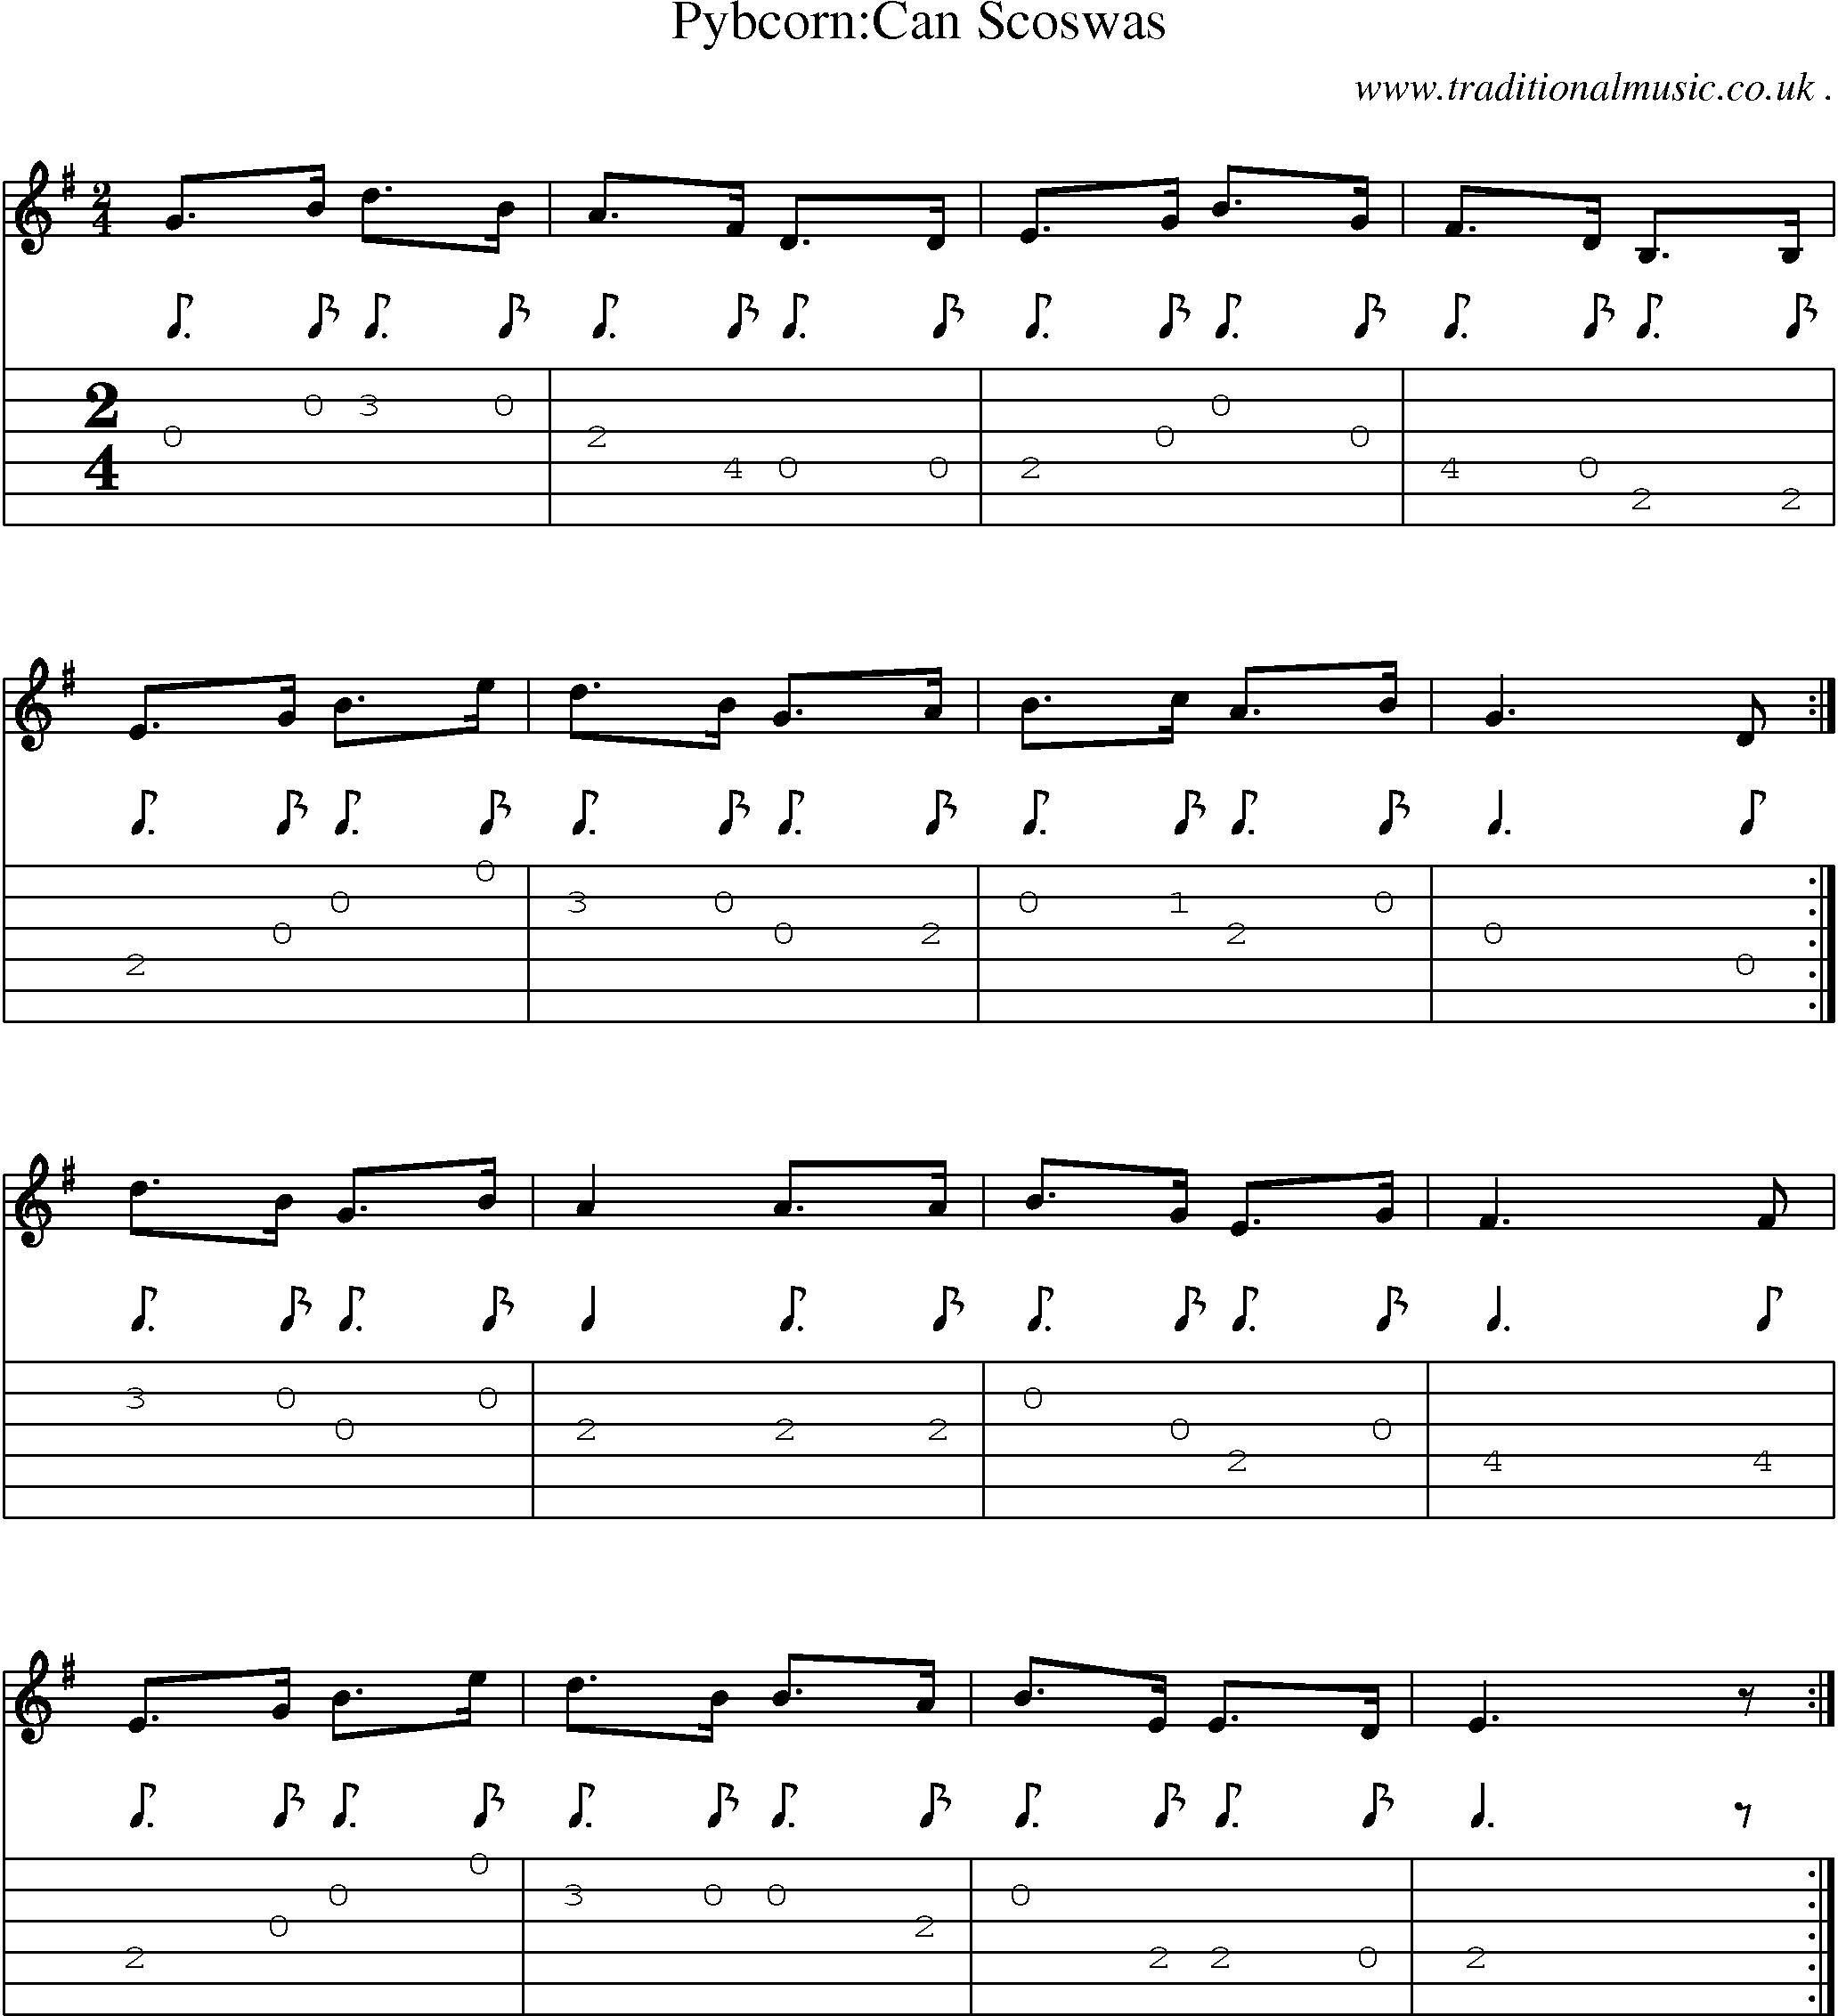 Sheet-Music and Guitar Tabs for Pybcorncan Scoswas